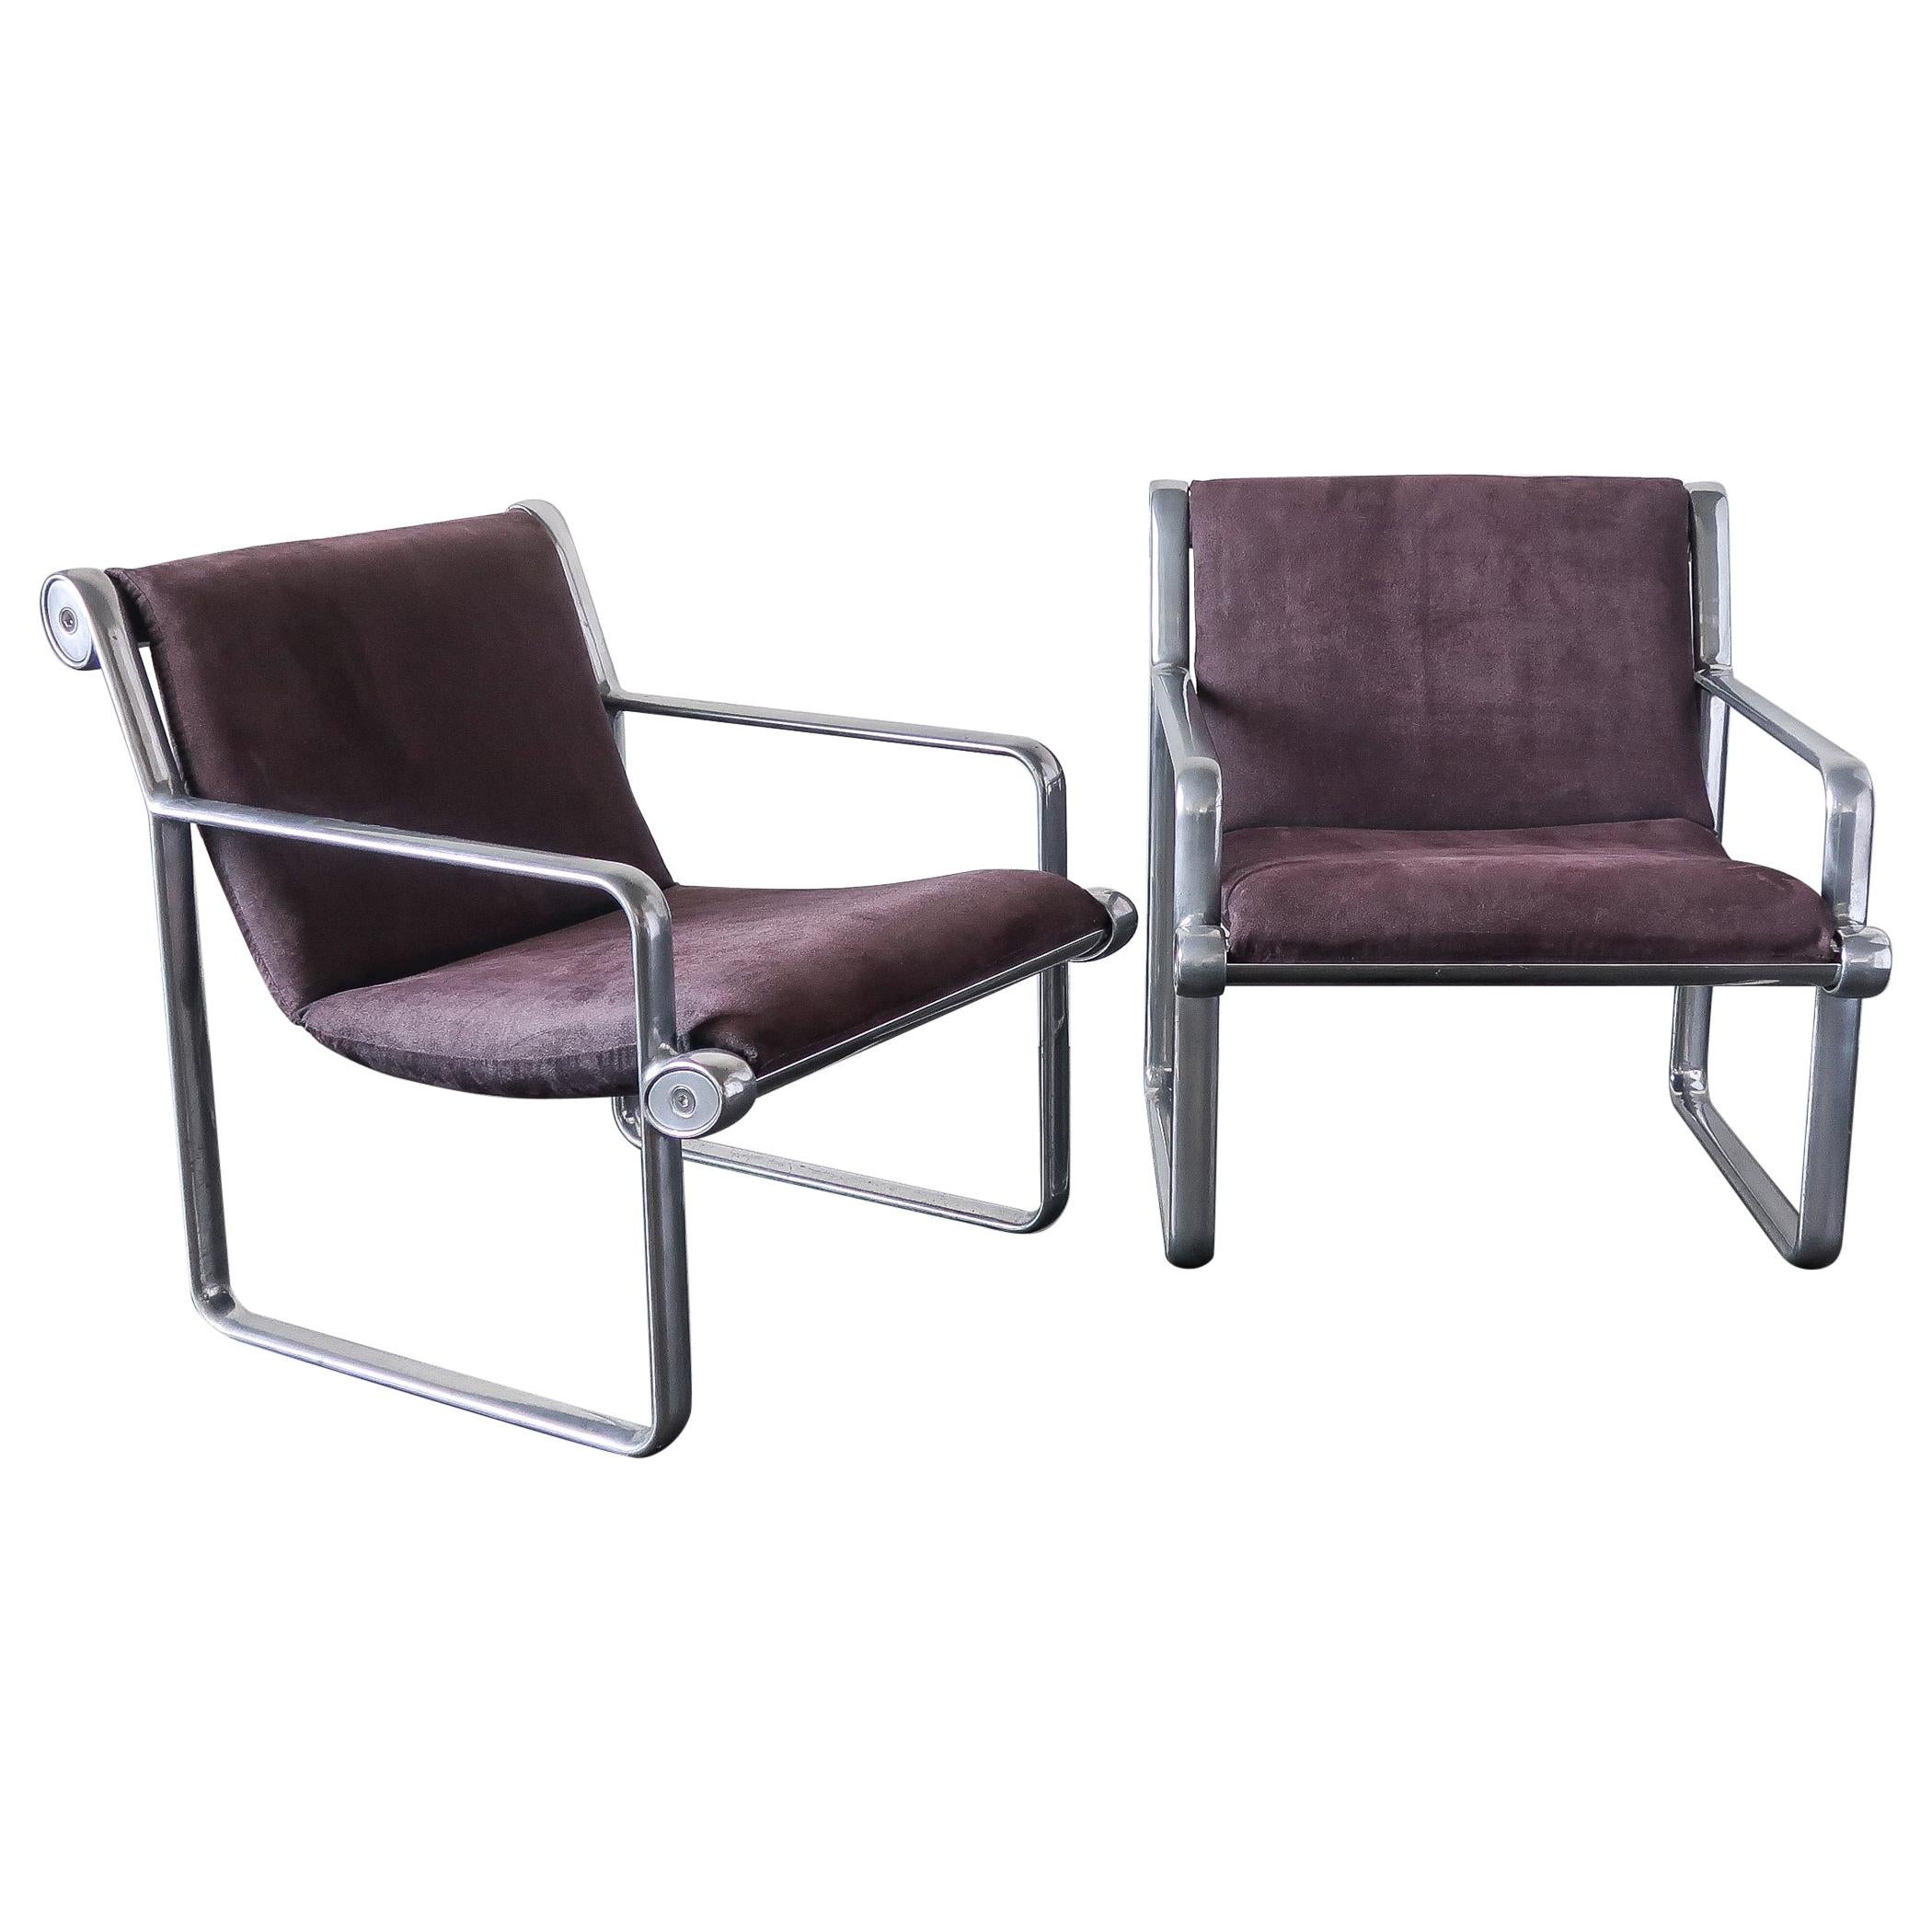 Pair of Hannah and Morrison Aluminum Armchairs for Knoll, 1971, Sling Seat For Sale